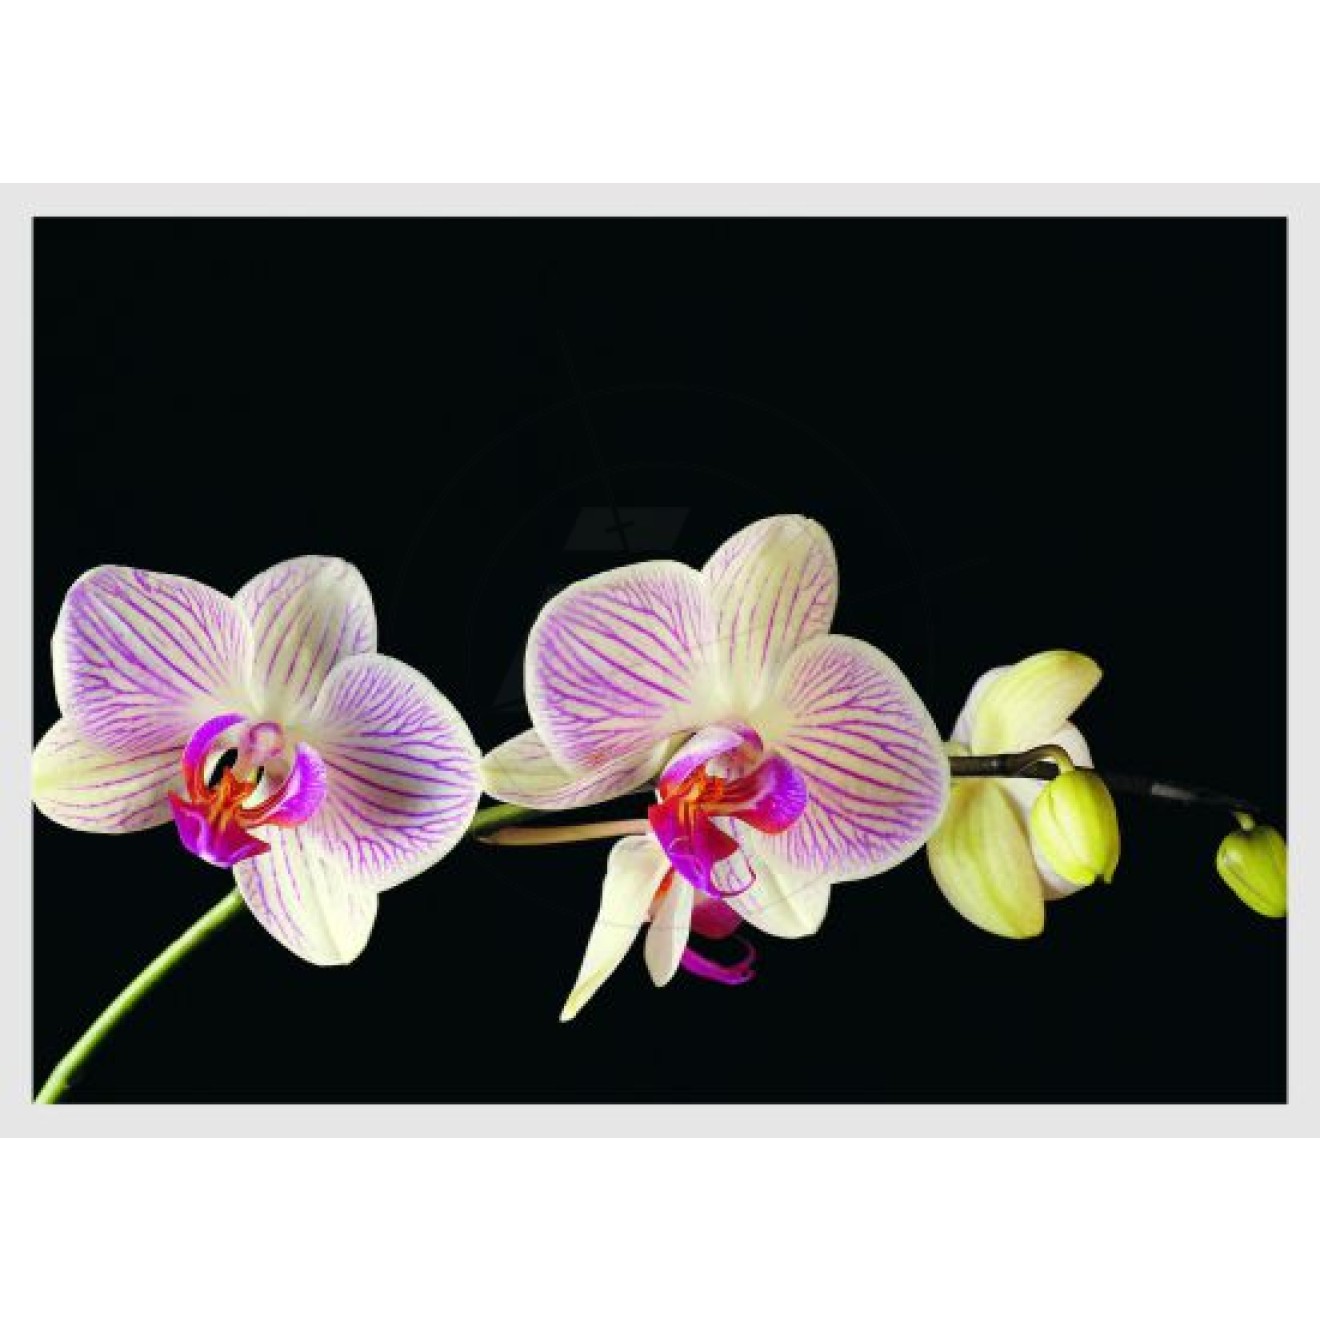 Orchid flowers, single stems